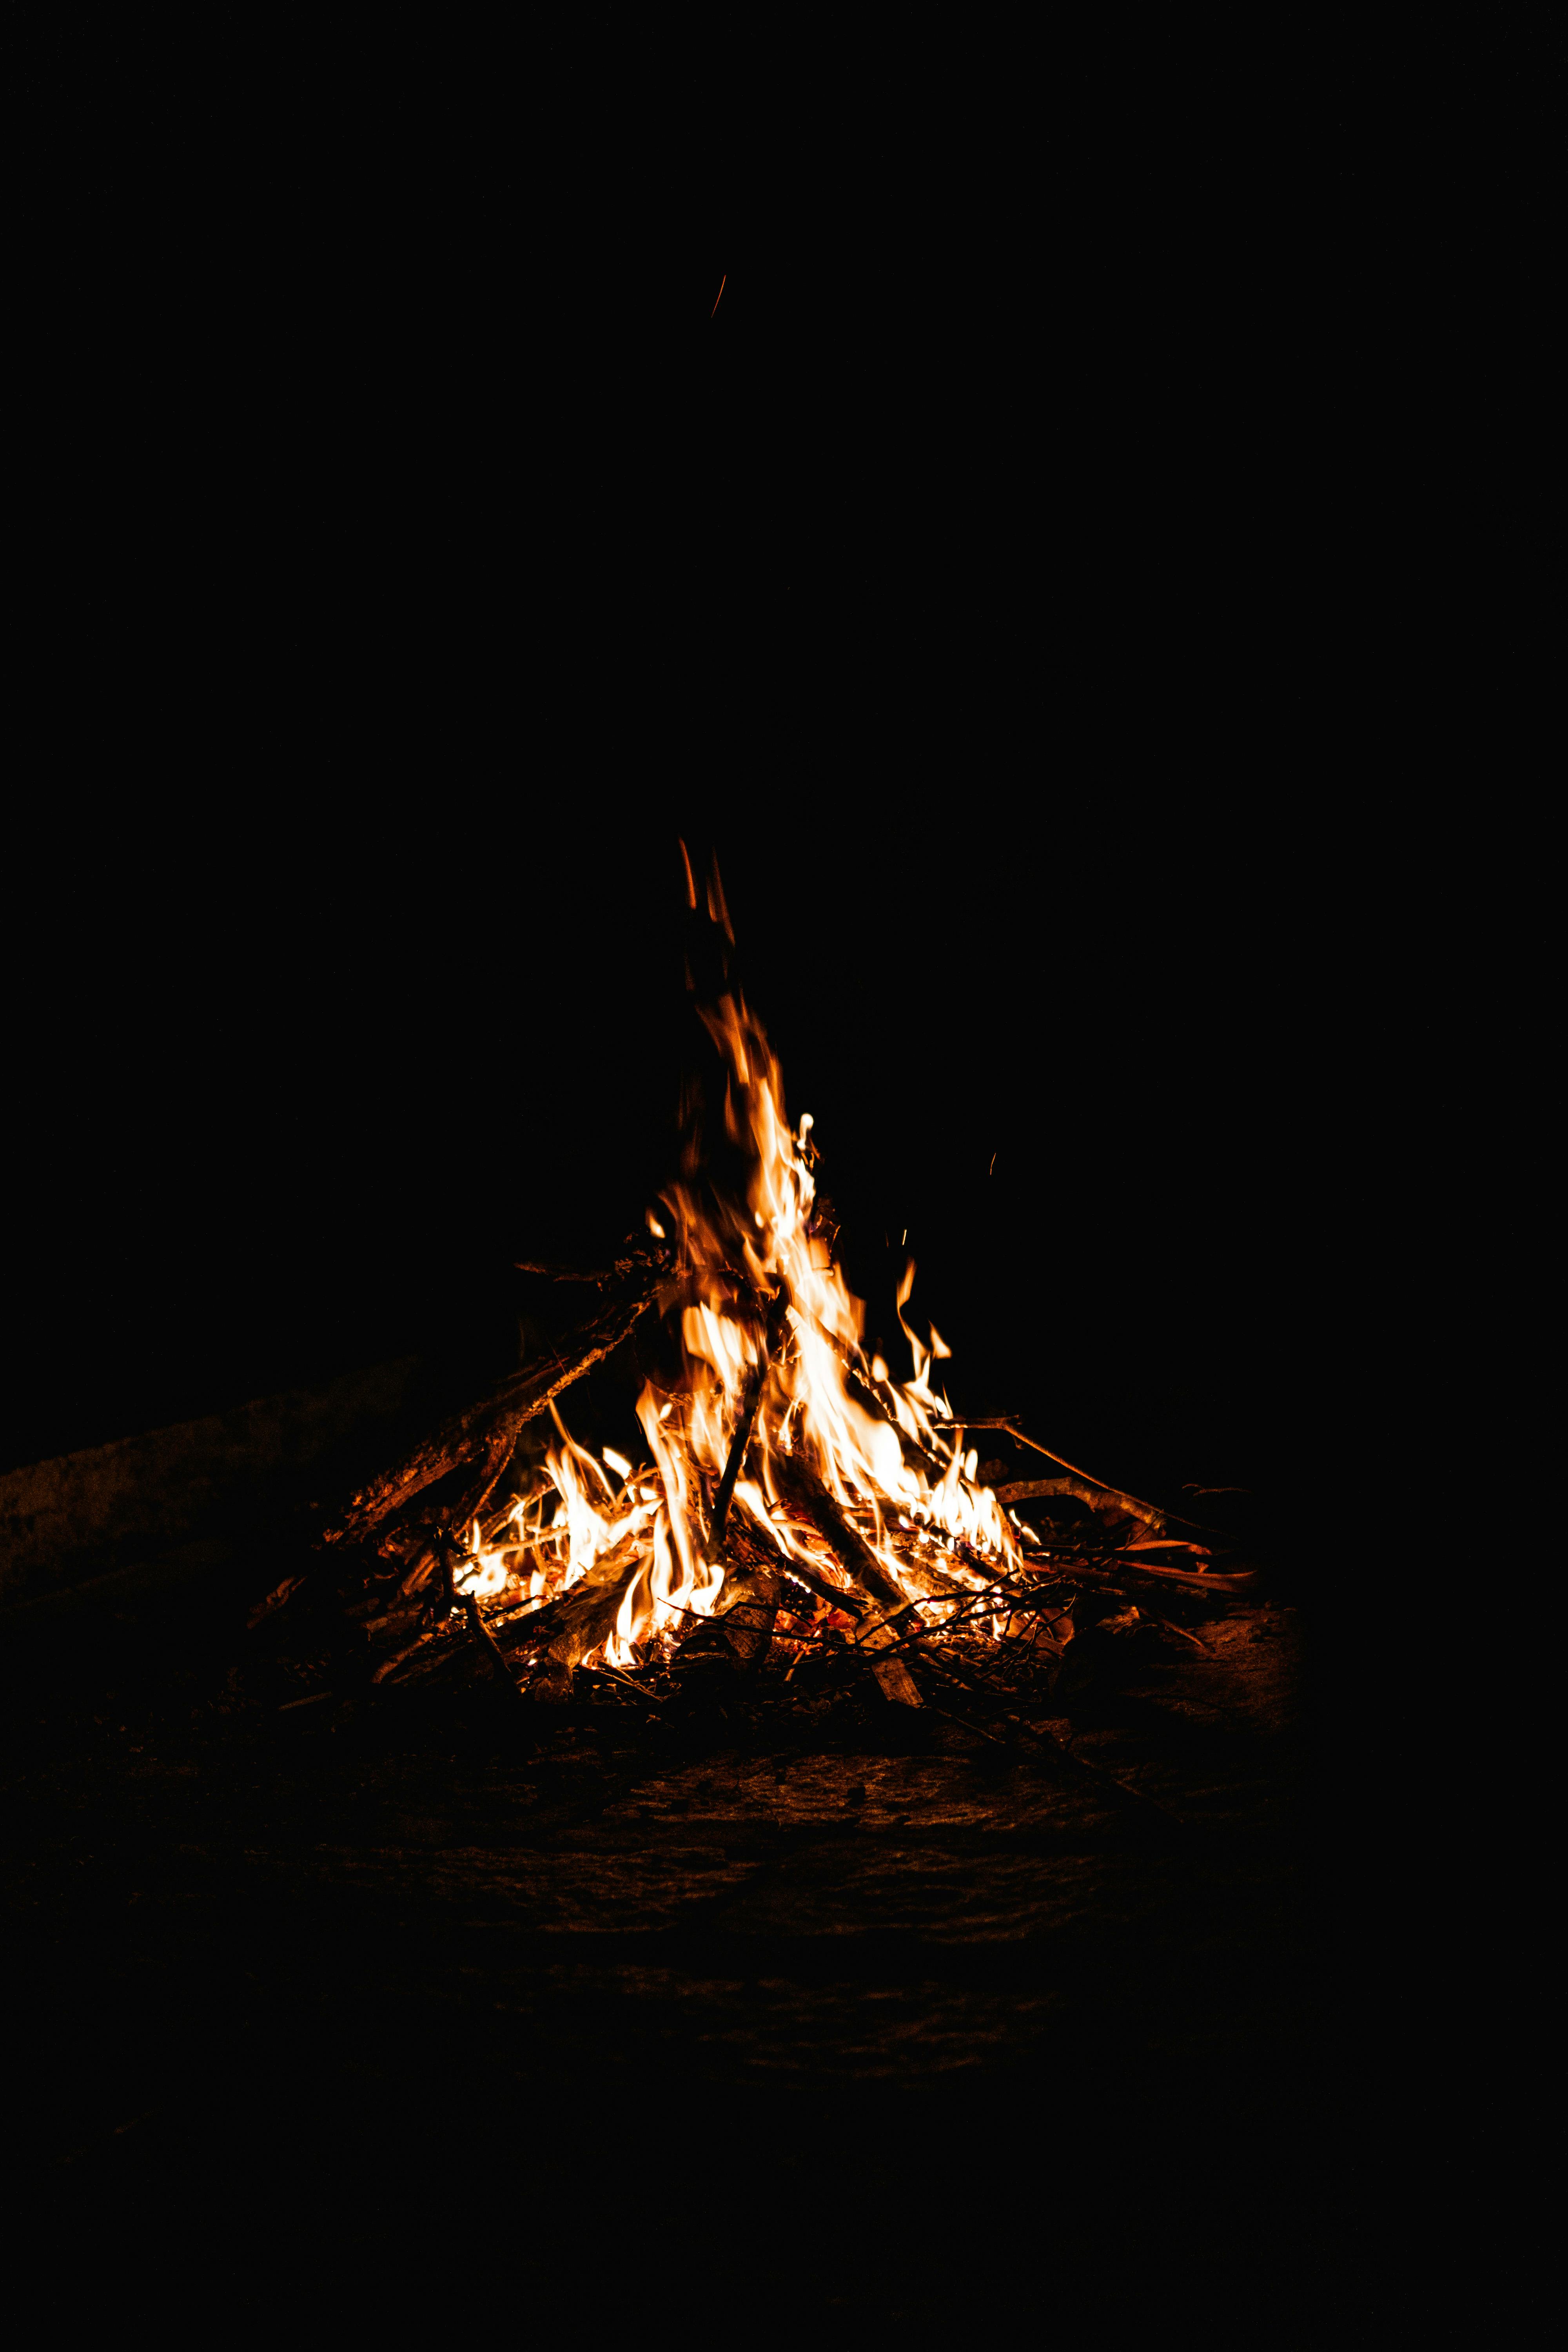 Fire Wood Pictures | Download Free Images on Unsplash